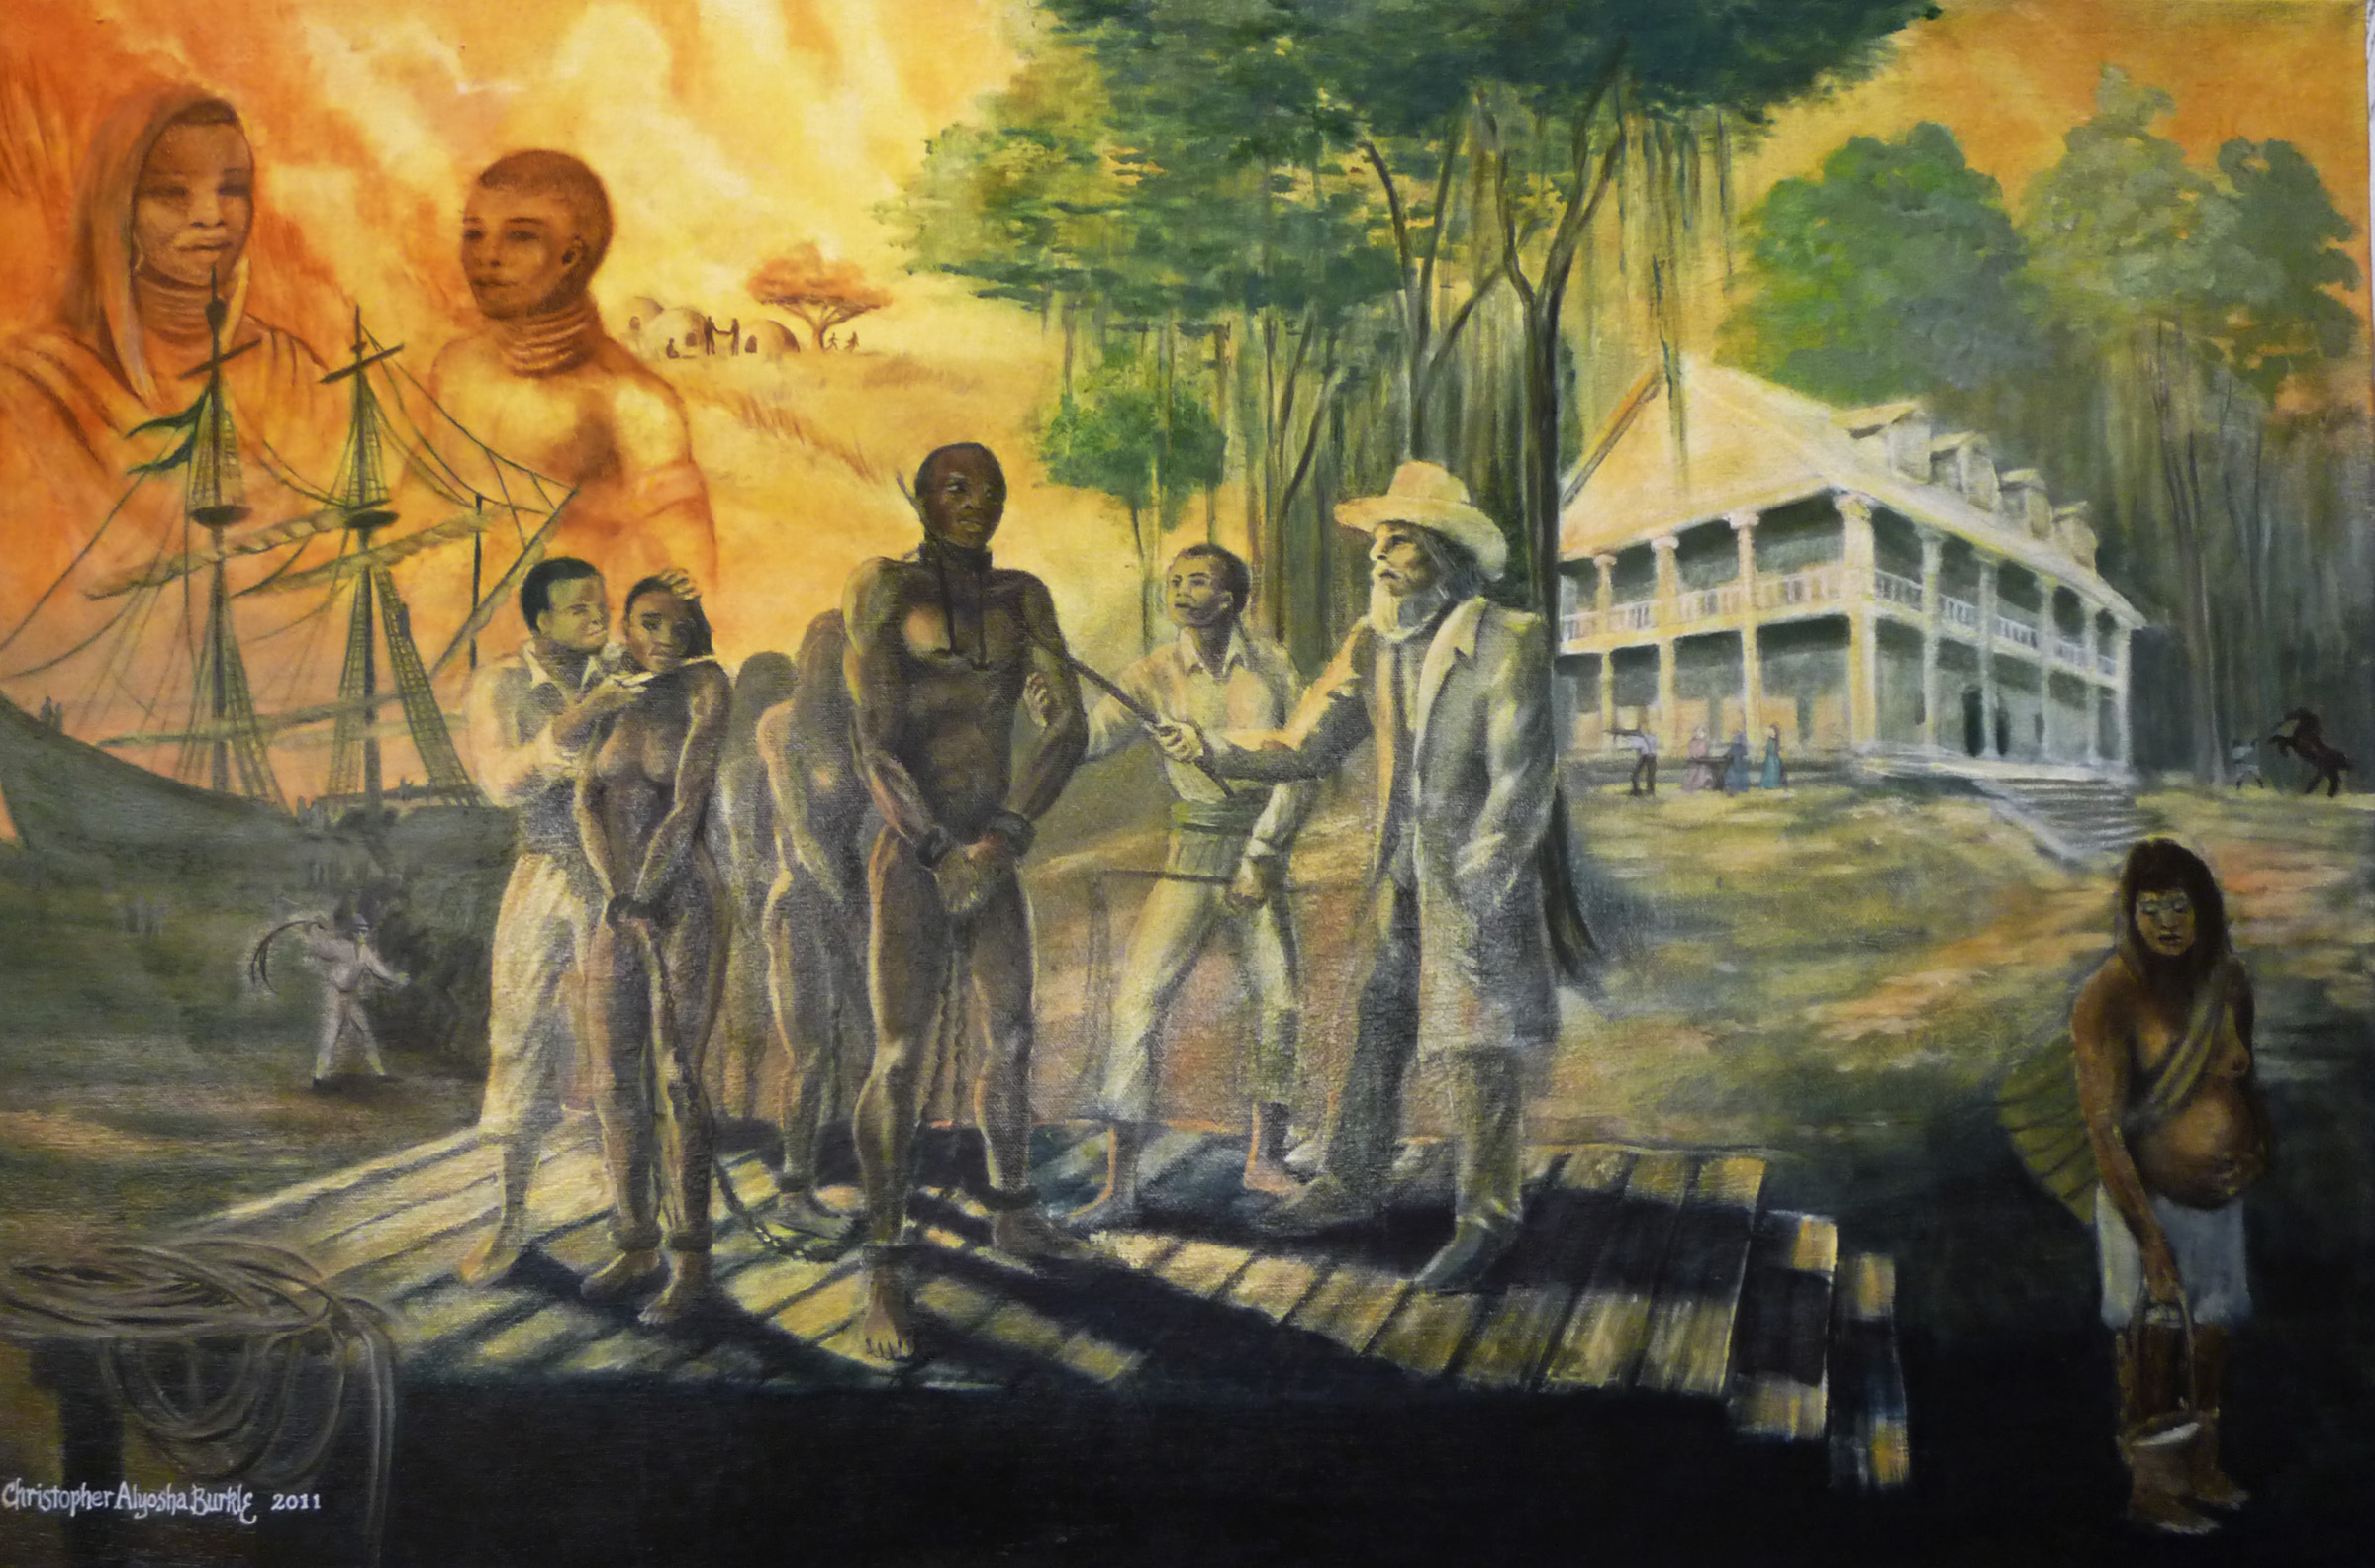 Painting with enslaved people and plantation owners